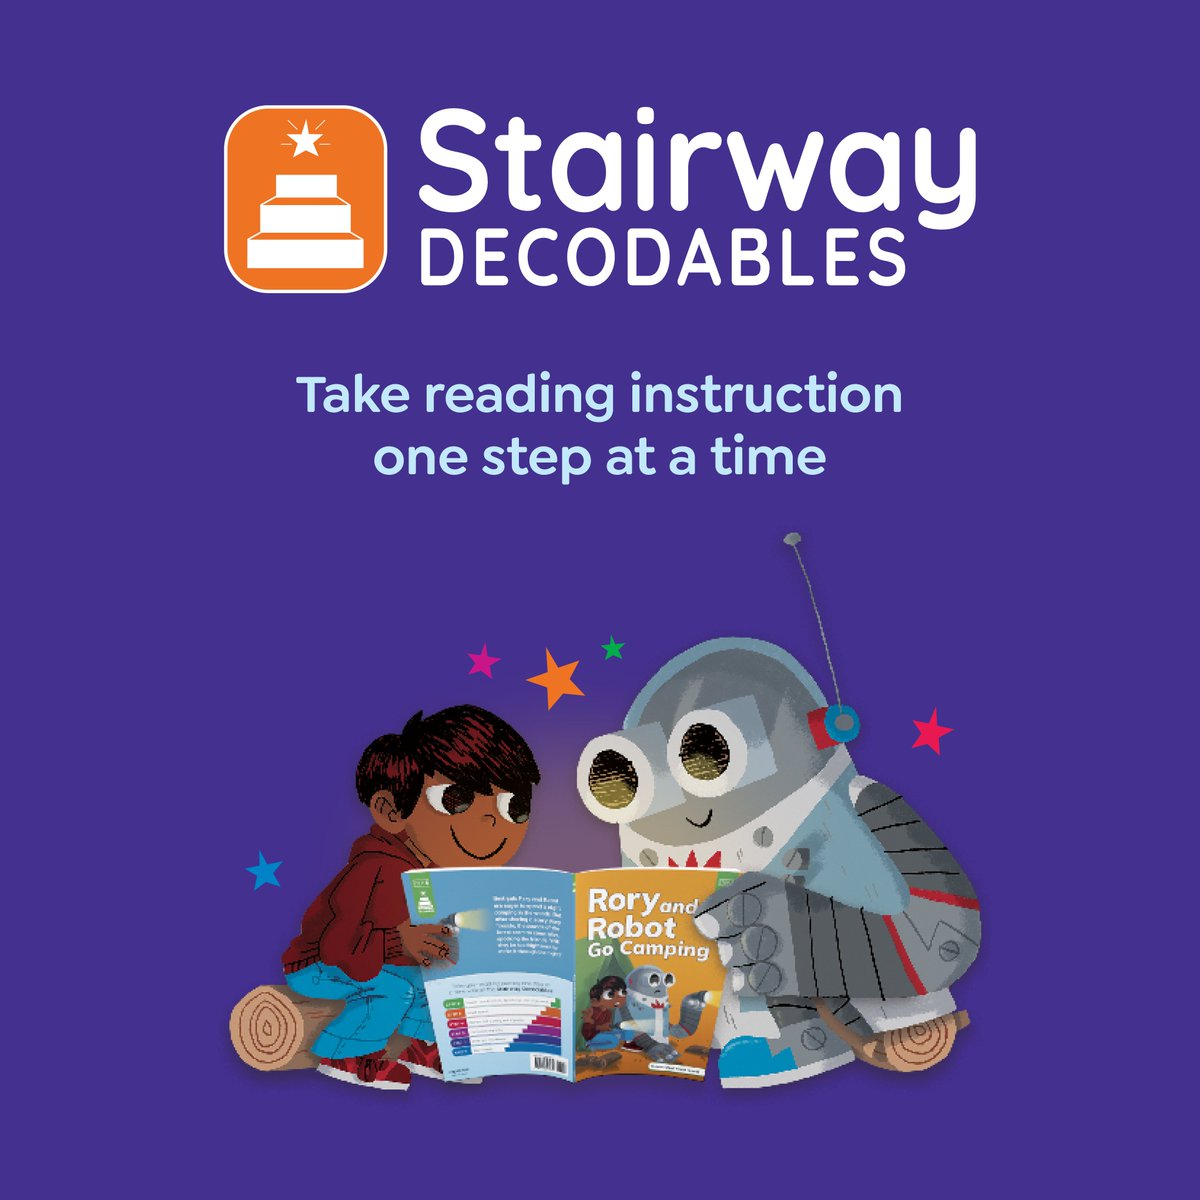 Beatrice Rendón, Capstone Senior Content Strategist, will speak at the Decodables: Building Confidence & Competence in Young Readers session at 2:50 PM ET! 

Join this session to learn how these resources benefit early readers by laying the foundation for reading & comprehension.